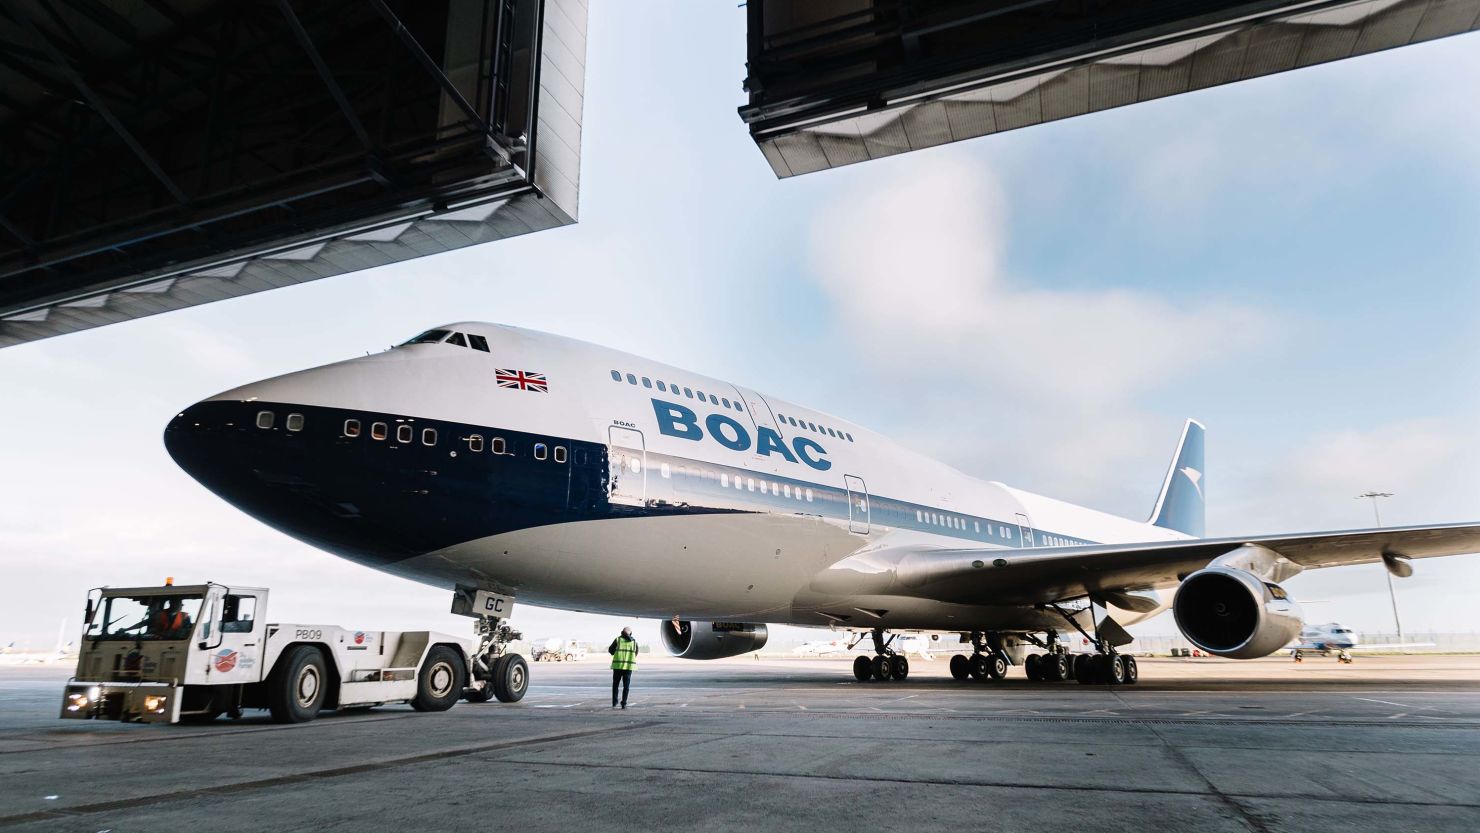 The Boeing 747 in vintage BOAC livery.